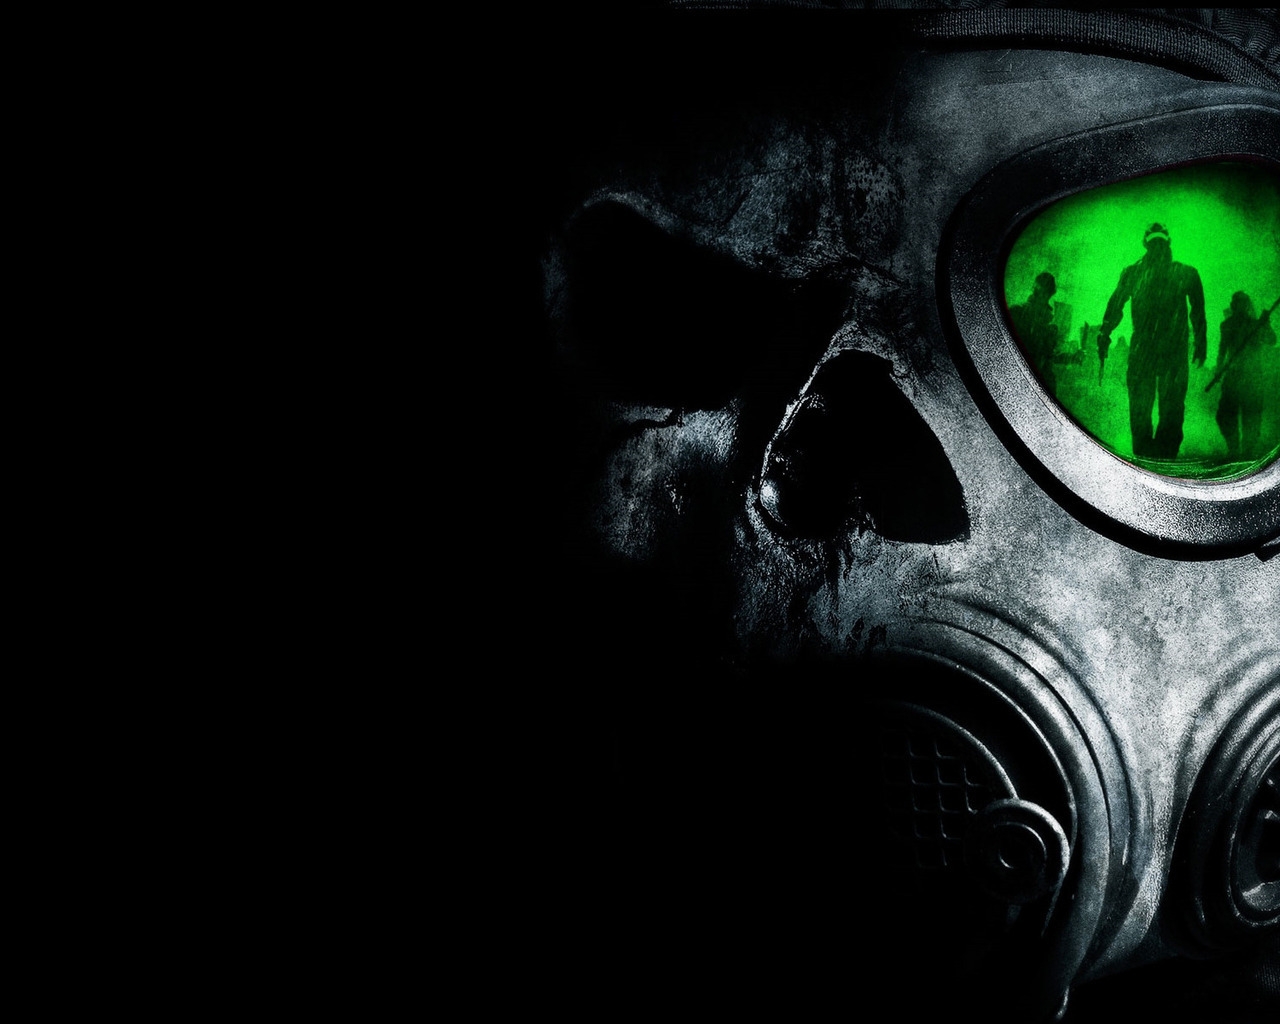 Gas Mask for 1280 x 1024 resolution